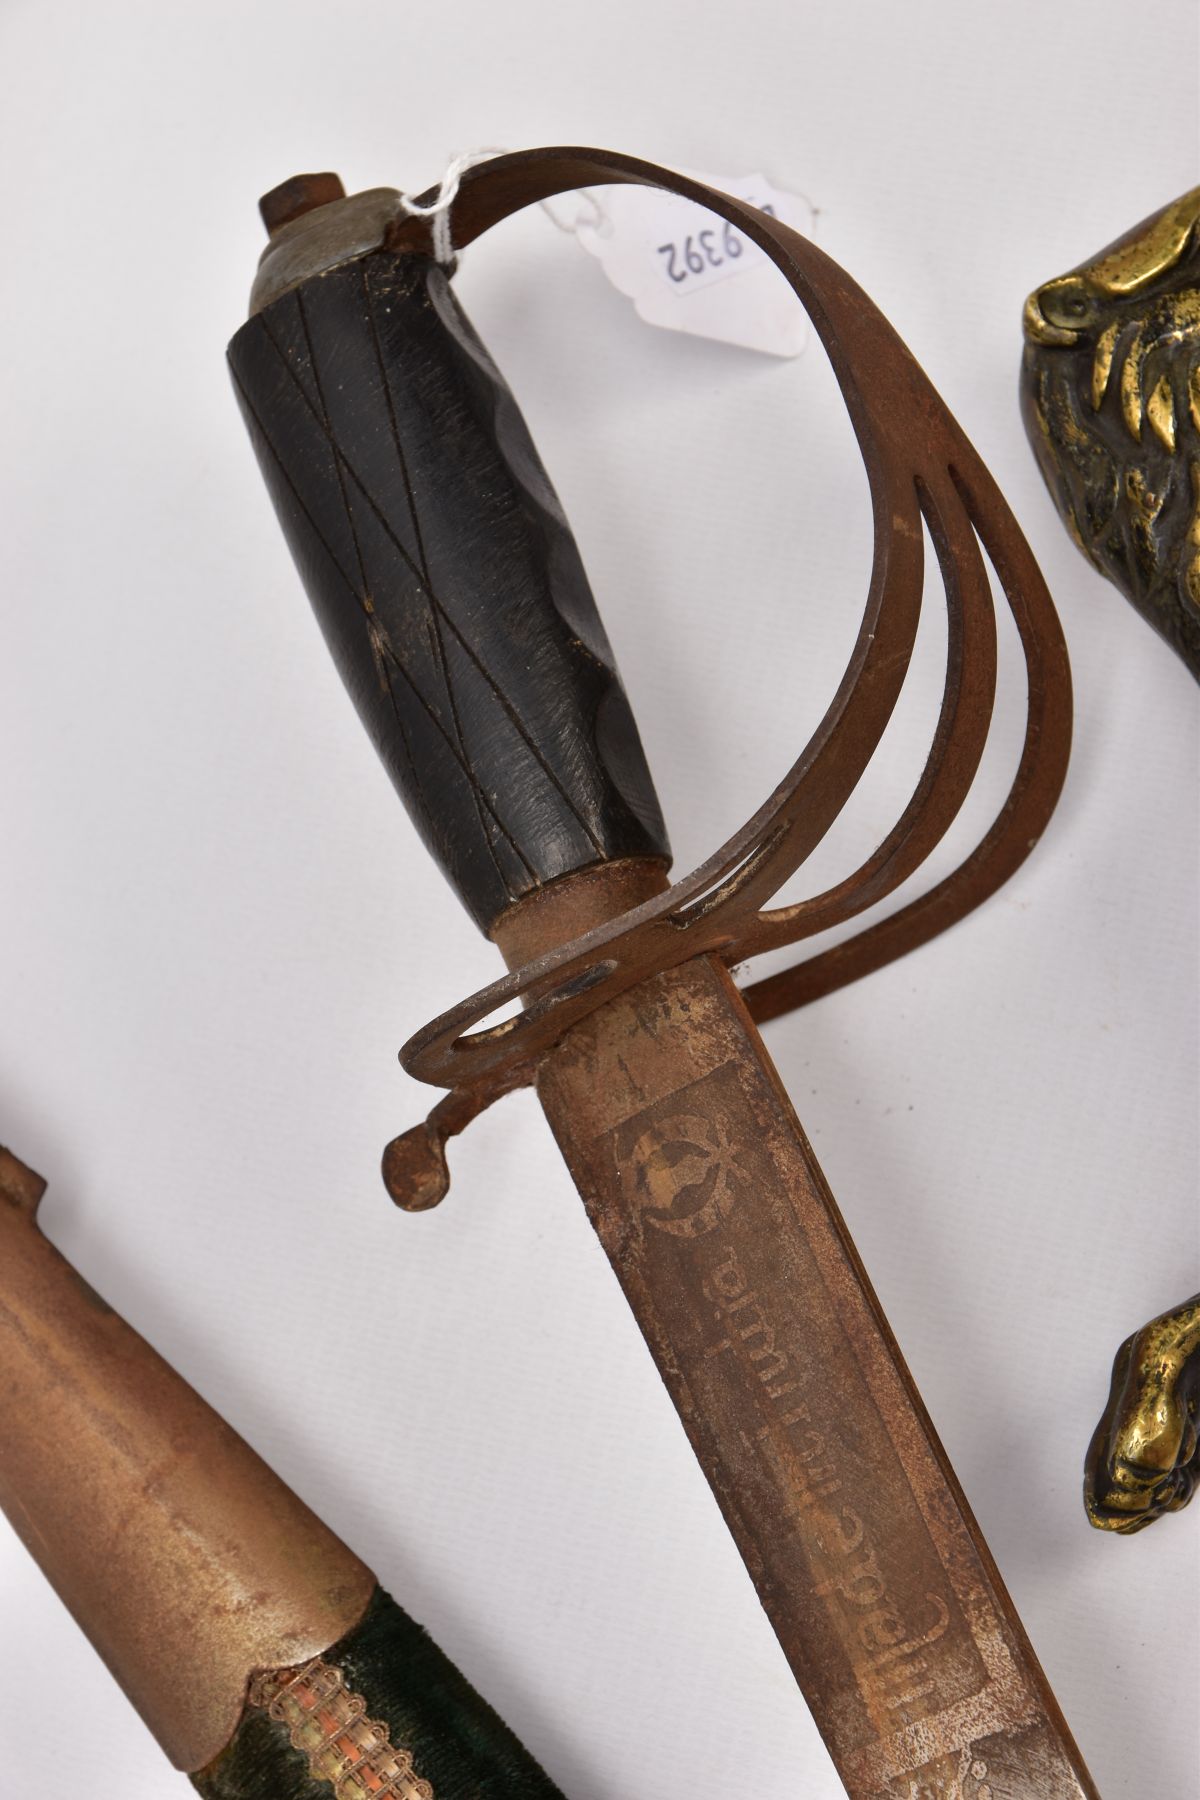 FIVE ASSORTED BLADED WEAPONS, two small short swords, curved blades, poorly constructed, knots in - Image 4 of 14